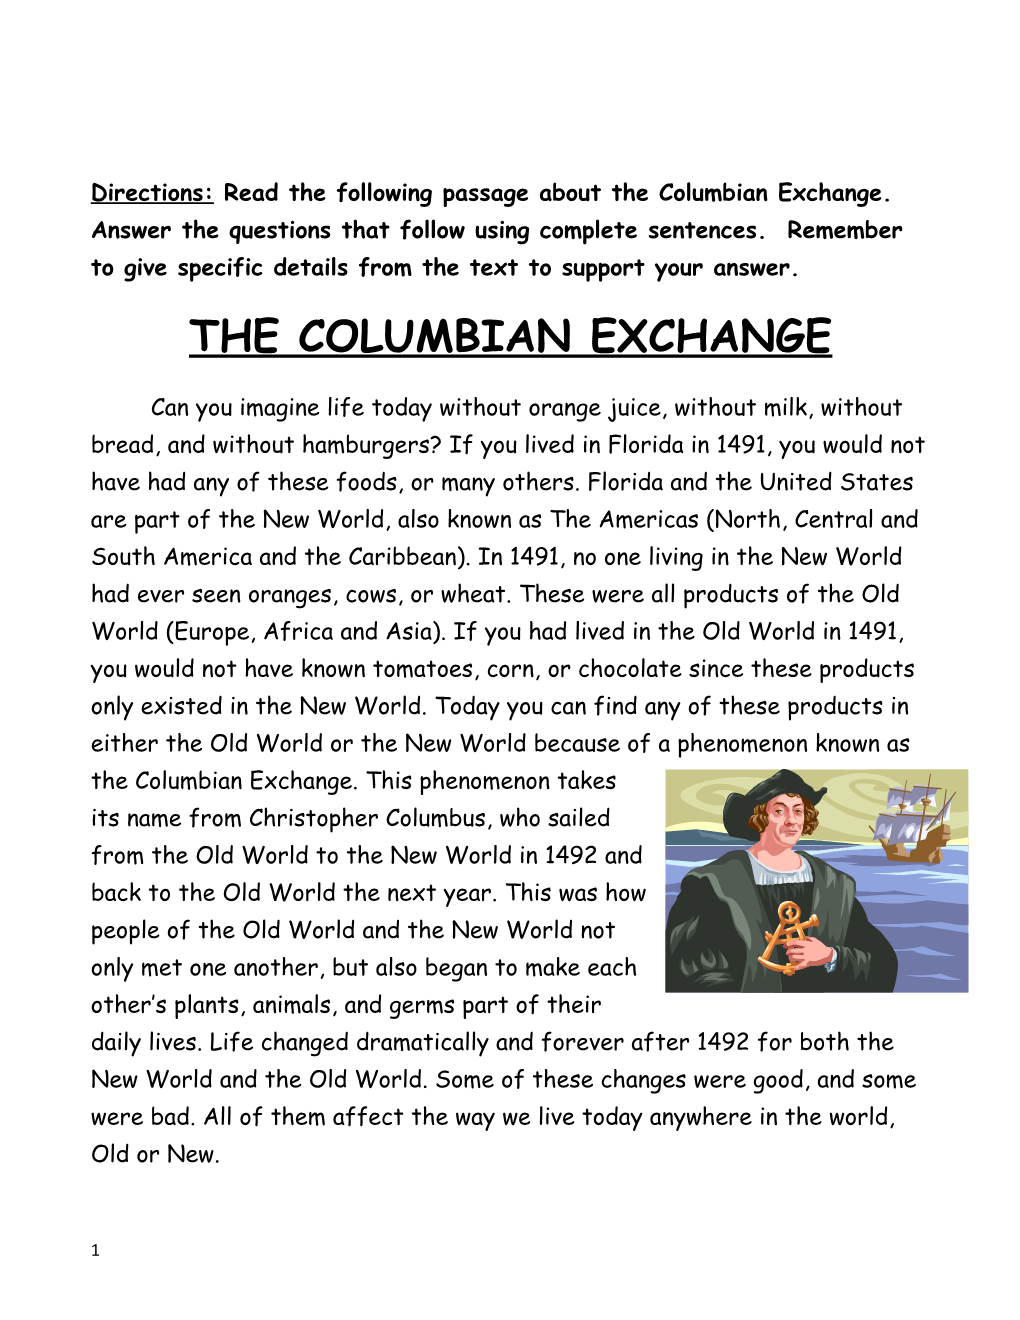 Directions:Read the Following Passage About the Columbian Exchange. Answer the Questions